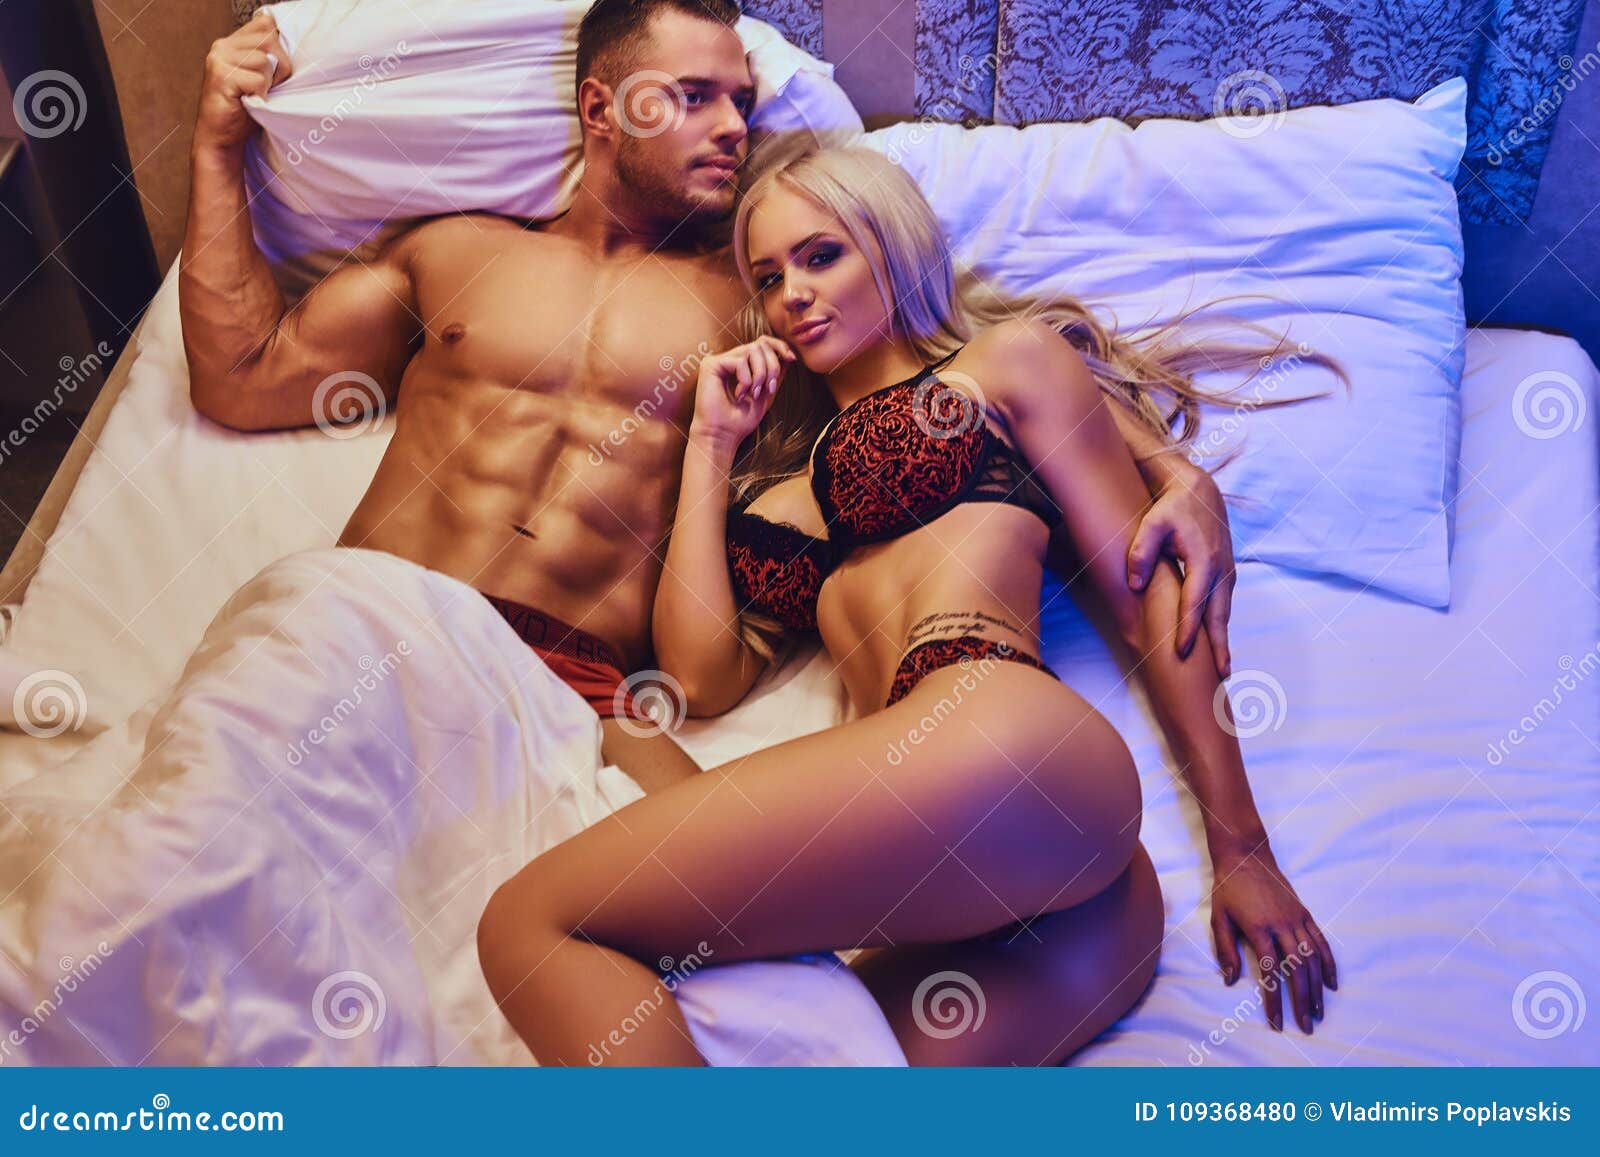 Portrait of Husband and Wife, Relaxing in Bed, Honeymoon image image